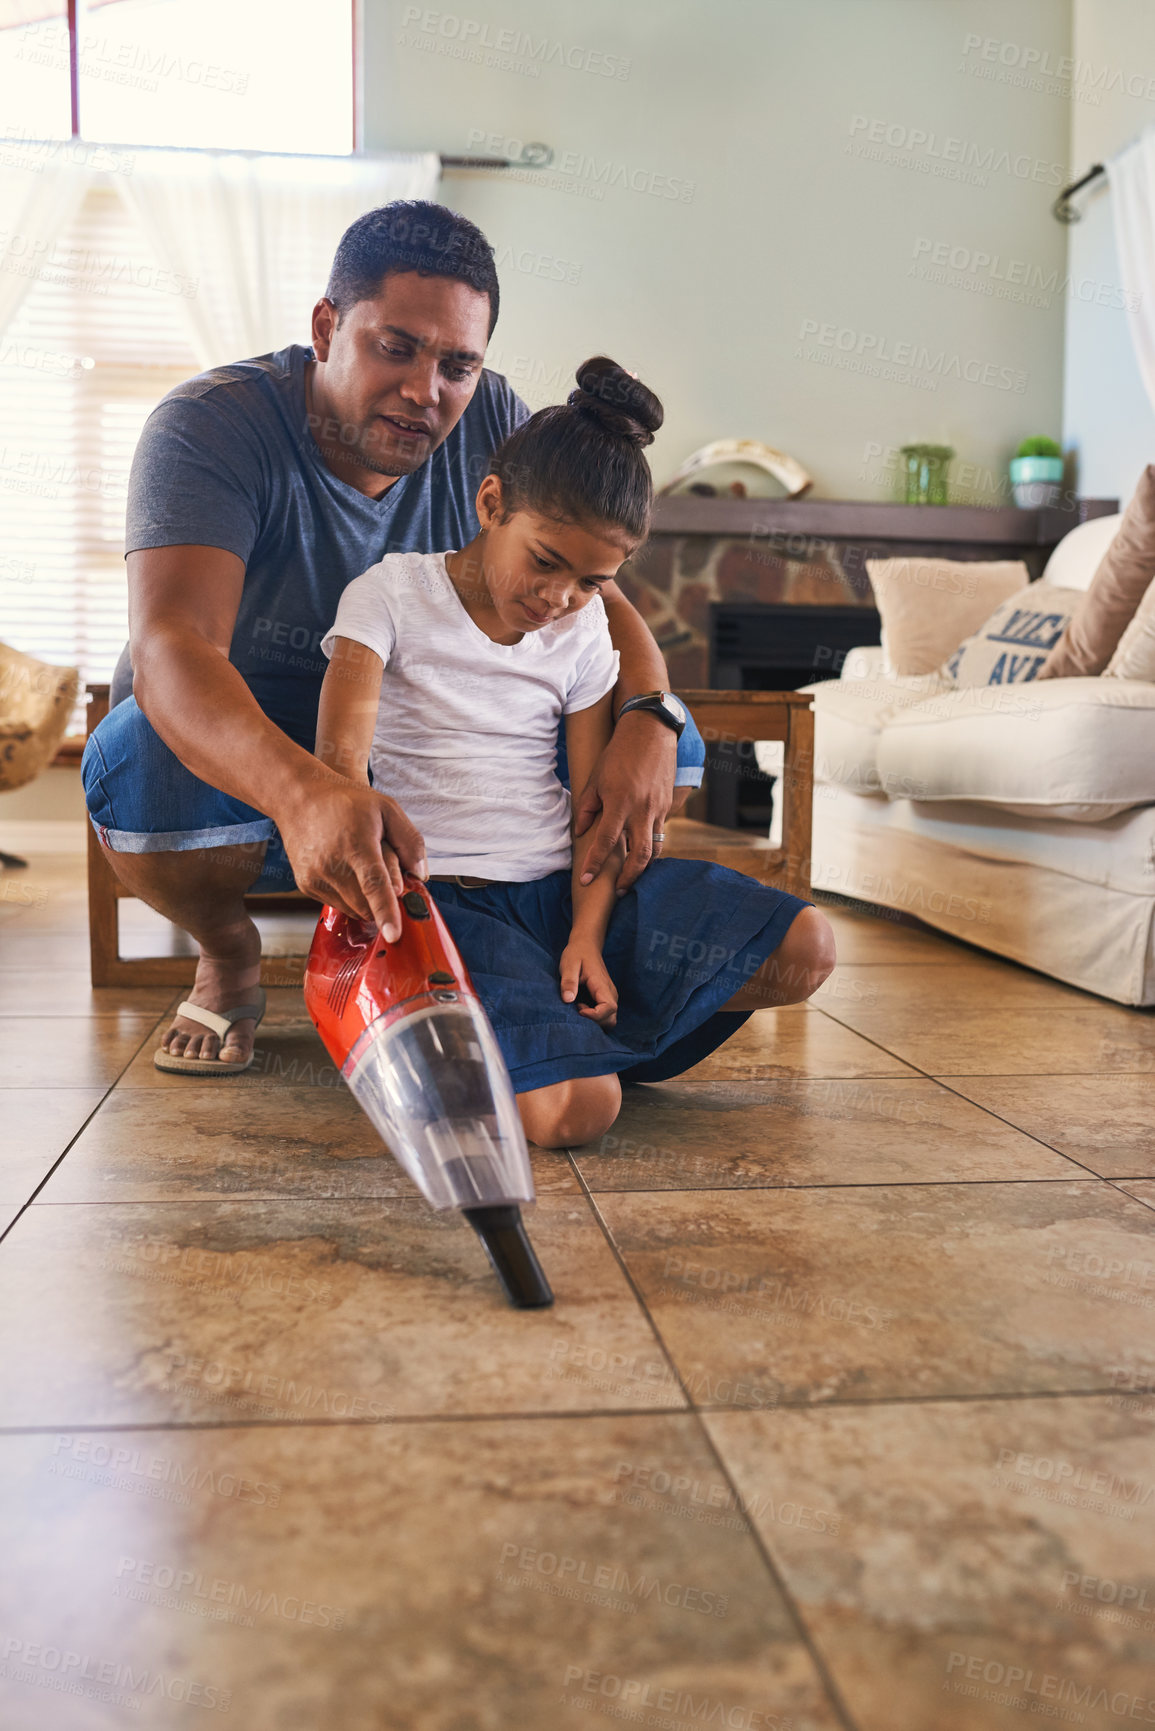 Buy stock photo Parent, child and cleaning by vacuum floor of living room of house as teamwork to learning responsibility at home. Family, chores and care by helping, bonding and cooperation for natural growth